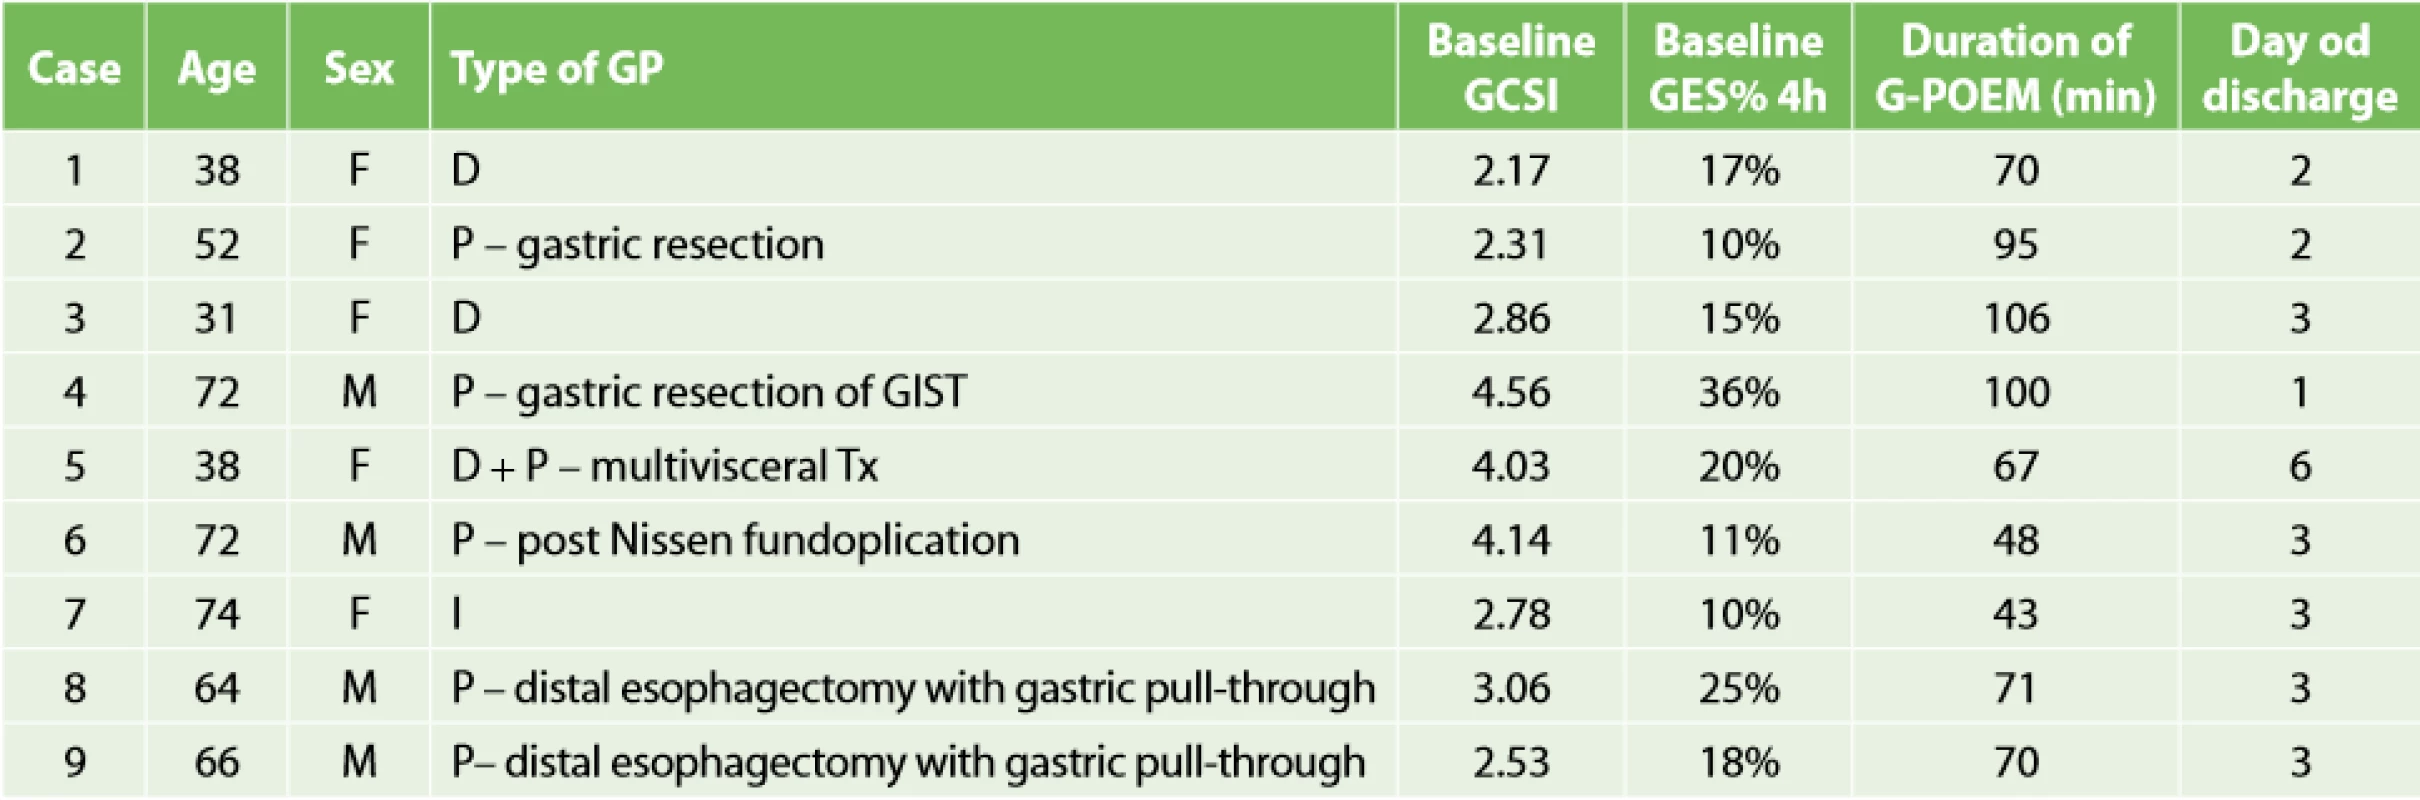 Baseline demographic data of the patients undergoing G-POEM 